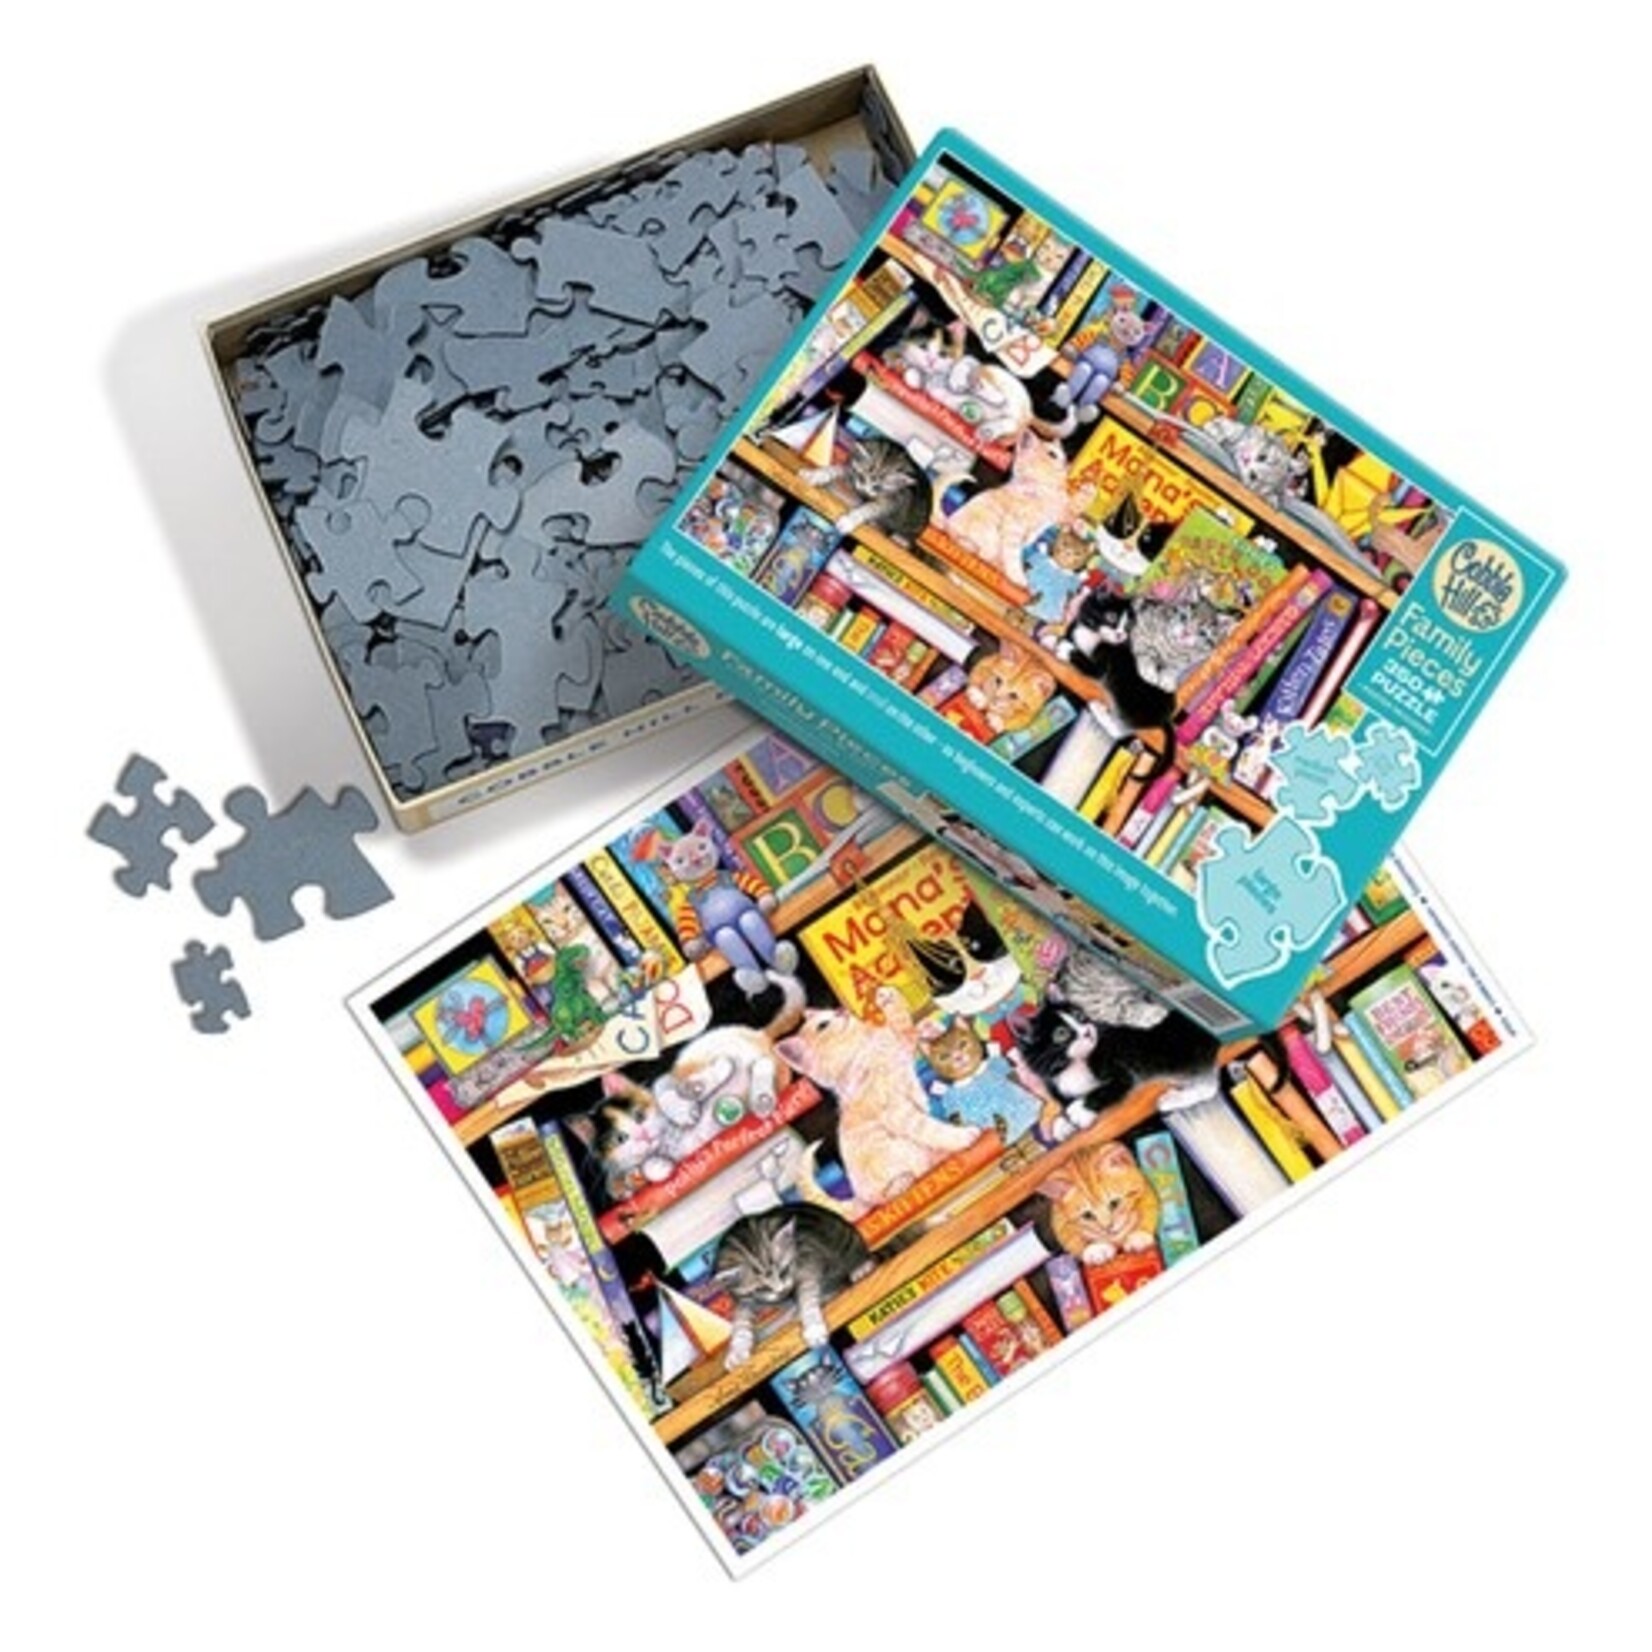 Cobble Hill Family Puzzle Storytime Kittens 350pc